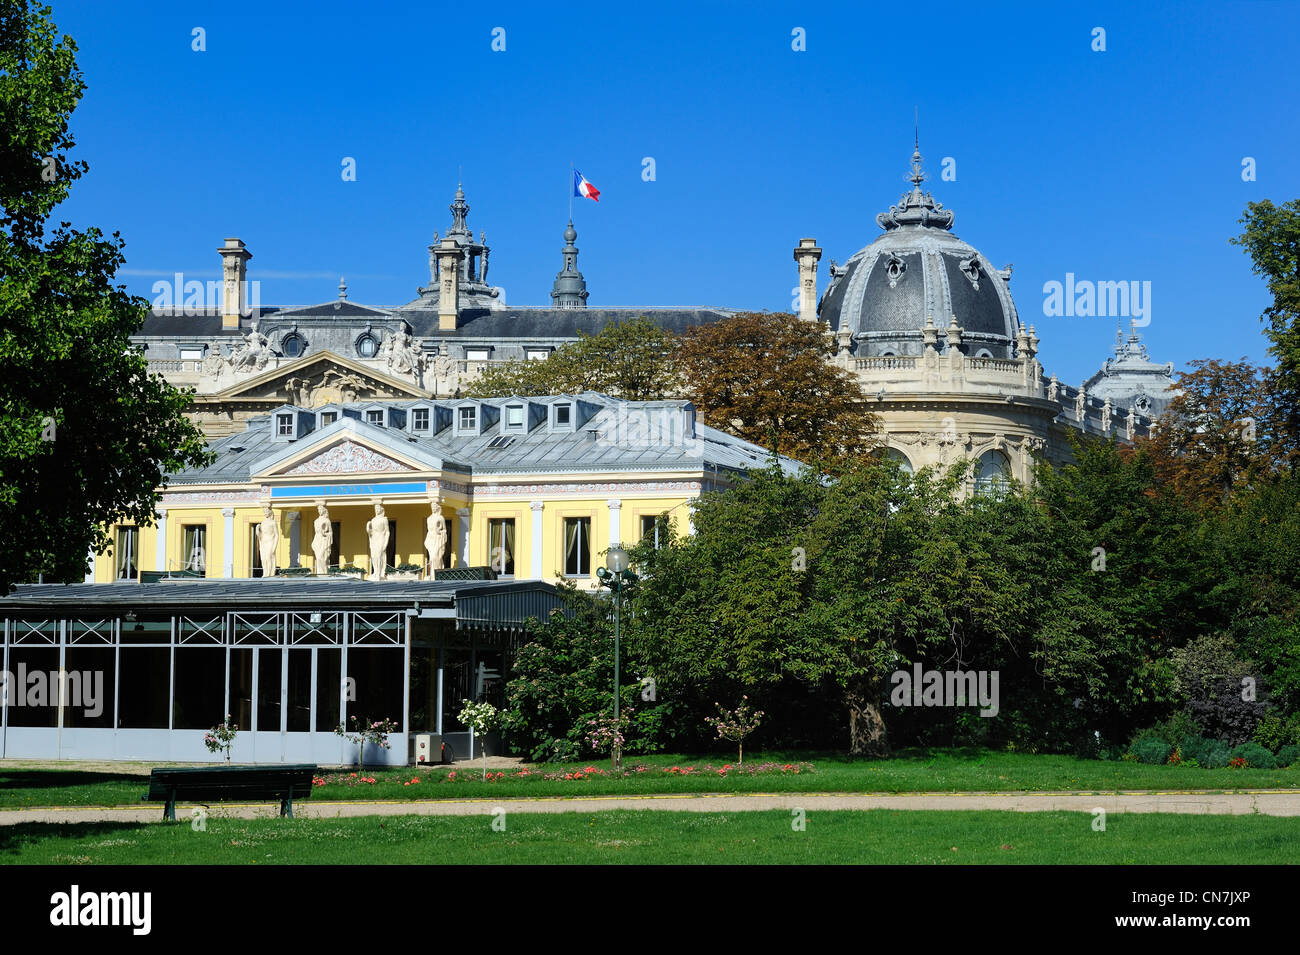 France, Paris, facade of the Pavillon Ledoyen, gastronomic restaurant and roof of the Petit Palais in the background Stock Photo